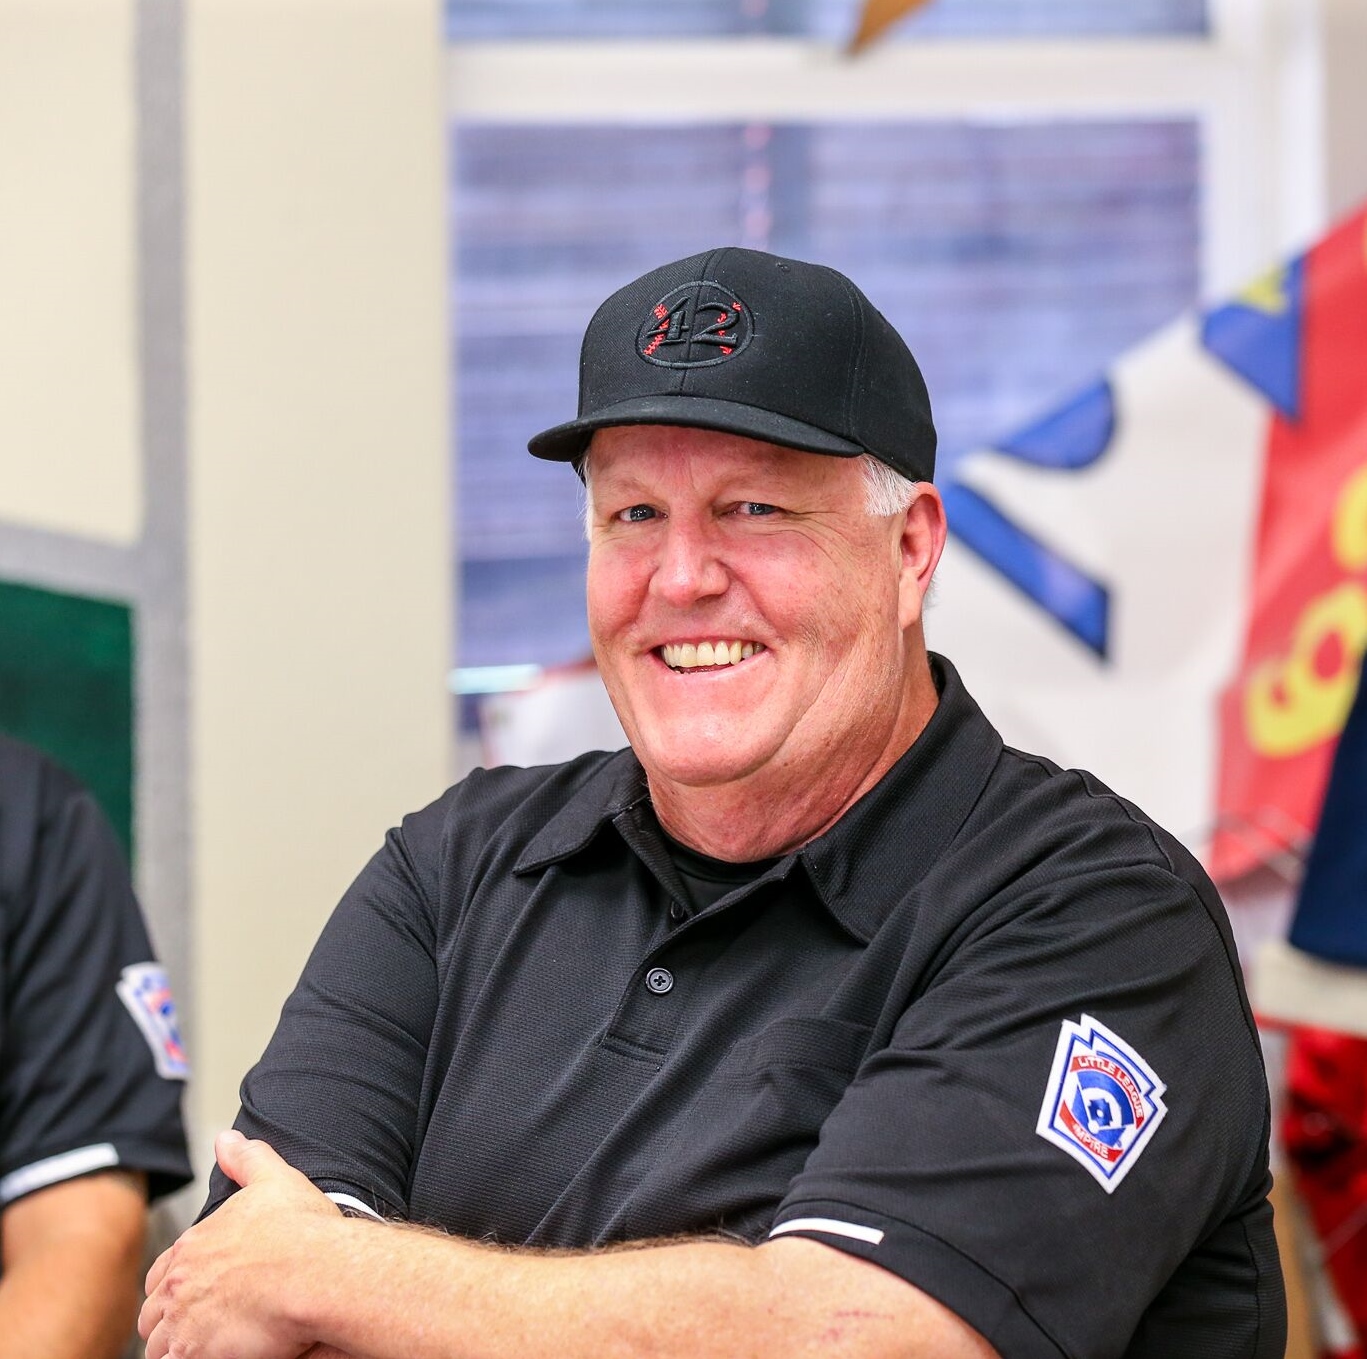 Umpires for Little League District 42 sat down with CaliSports News